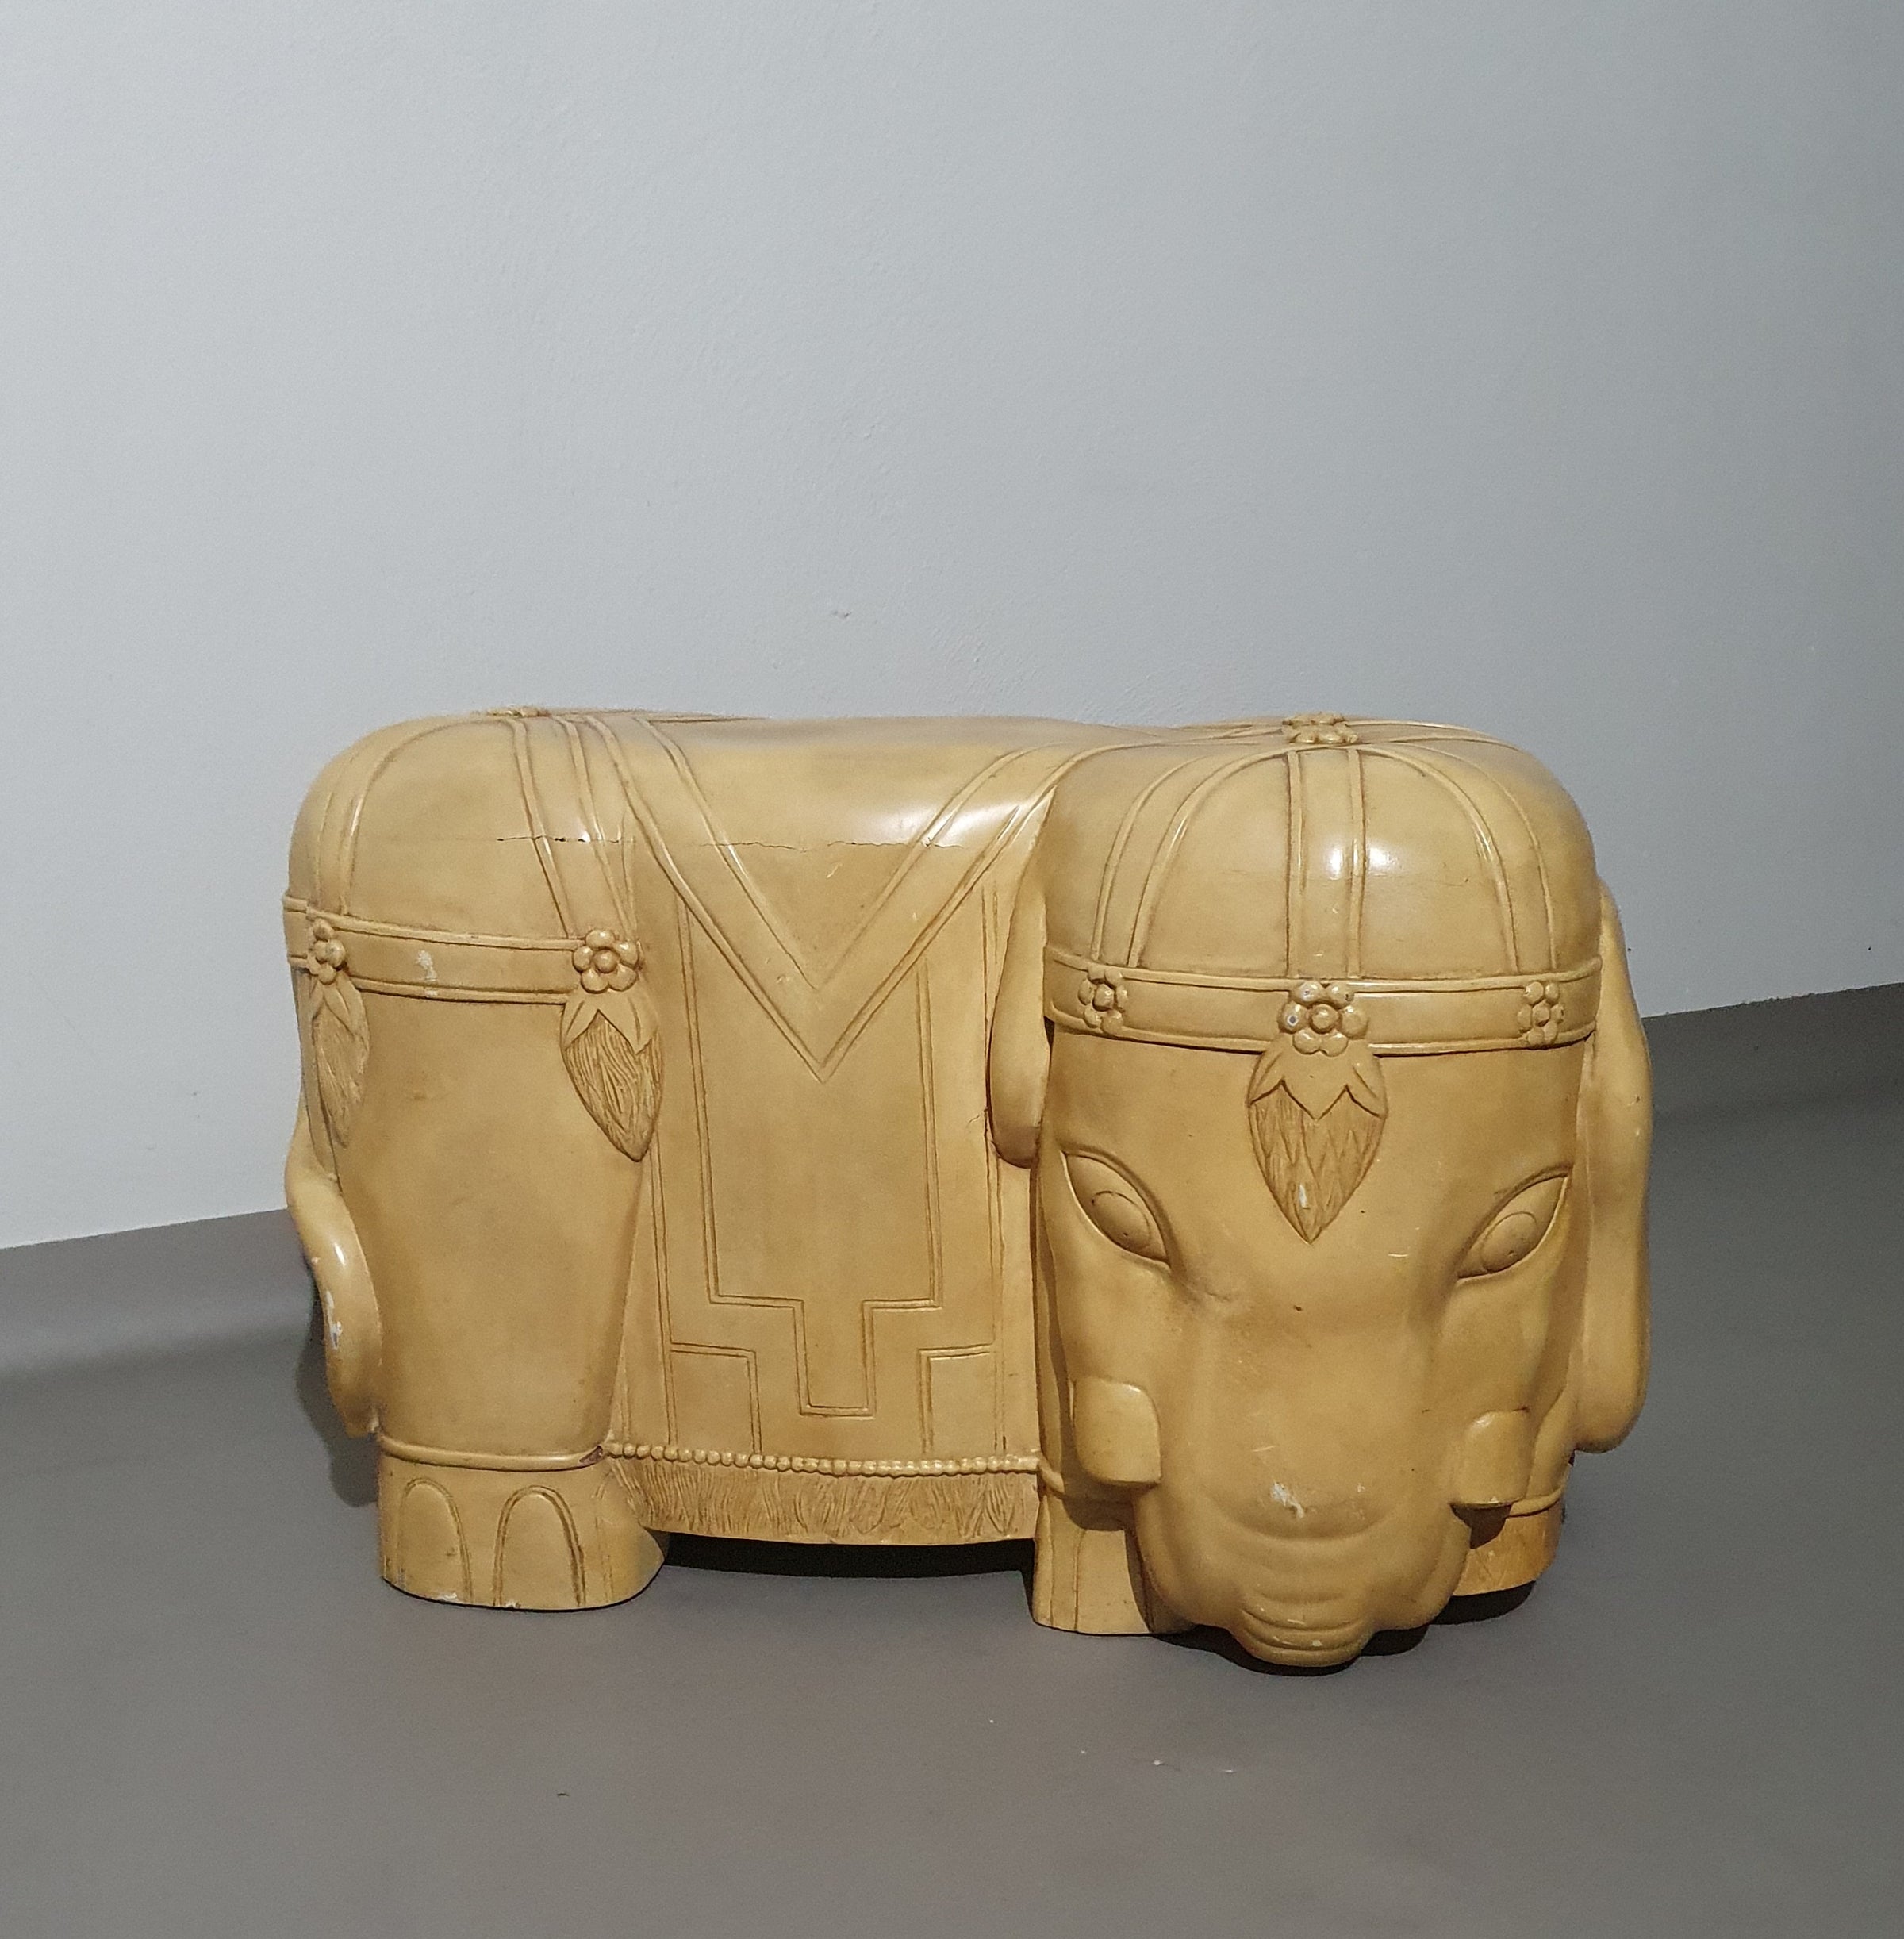 Decorative wood and resin elephant table / stool